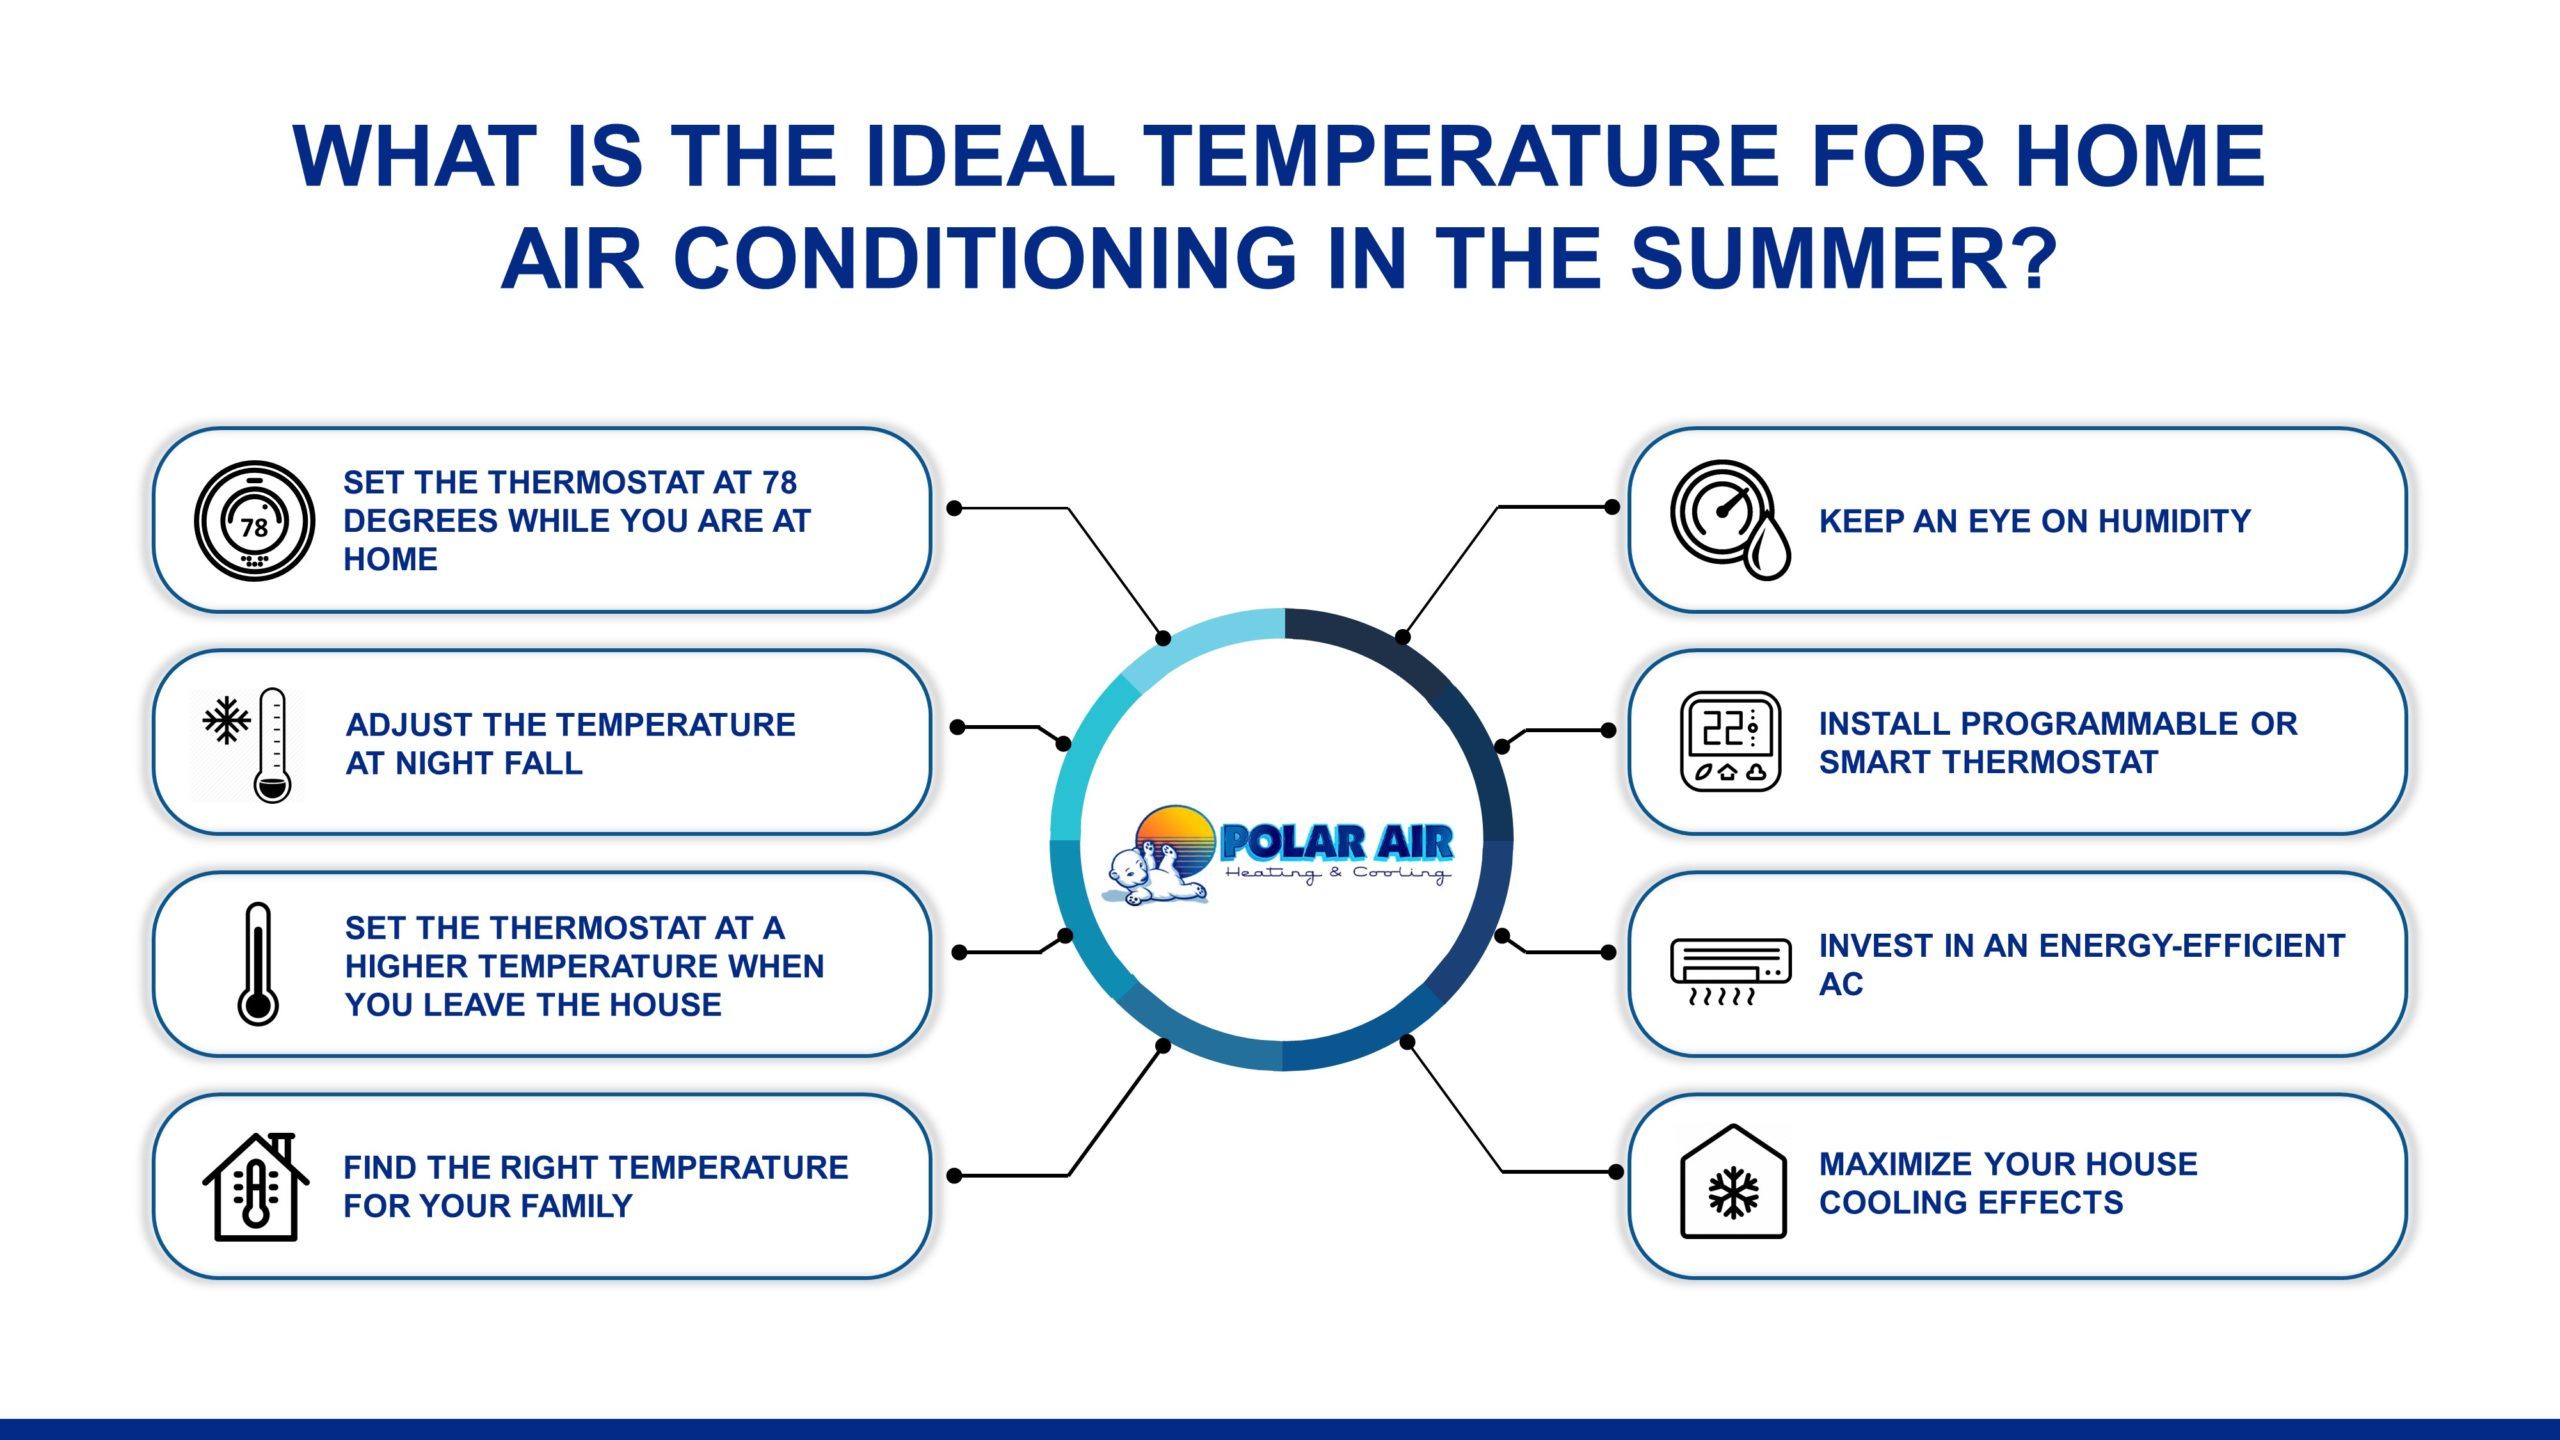 Ideal temperature for home air conditioning infographic